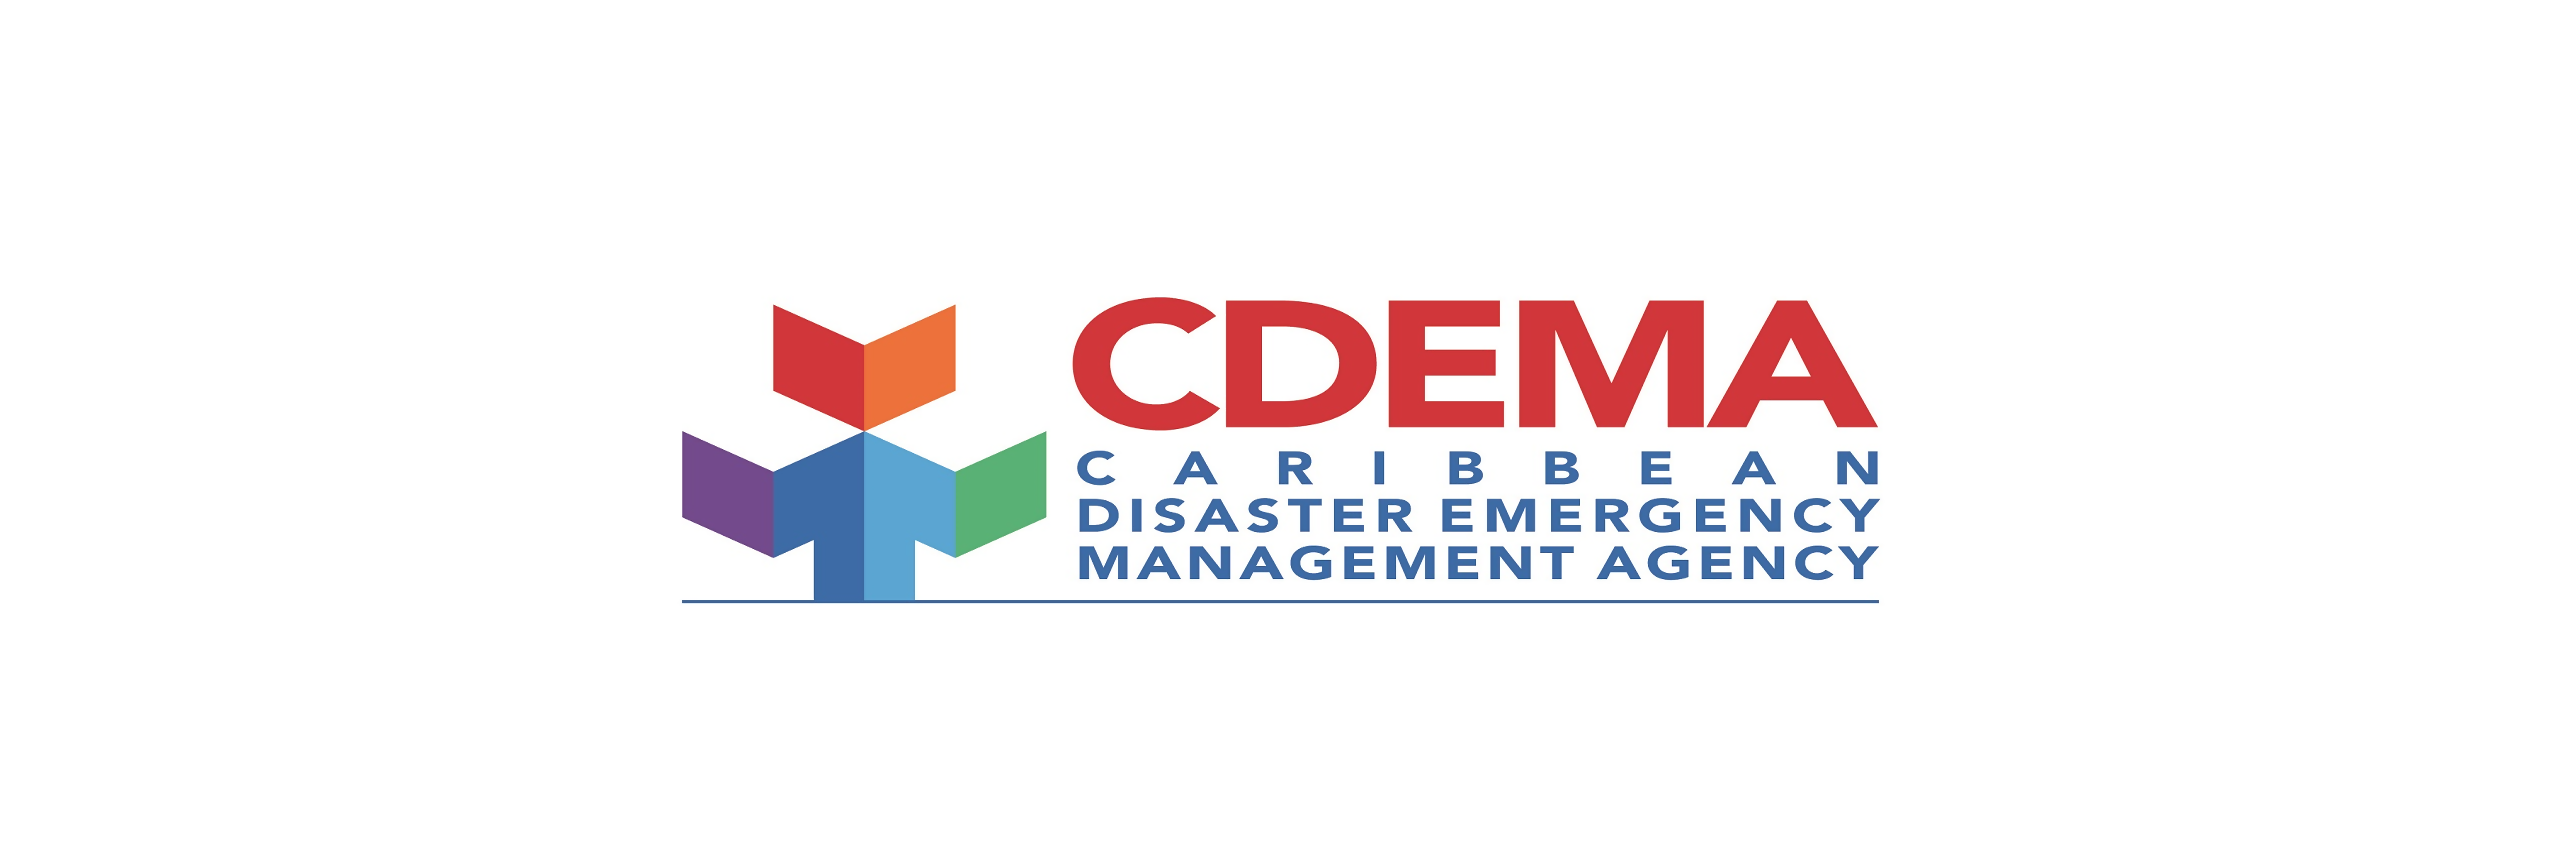 CDEMA - St. Maarten Government to co-host Disaster Conference